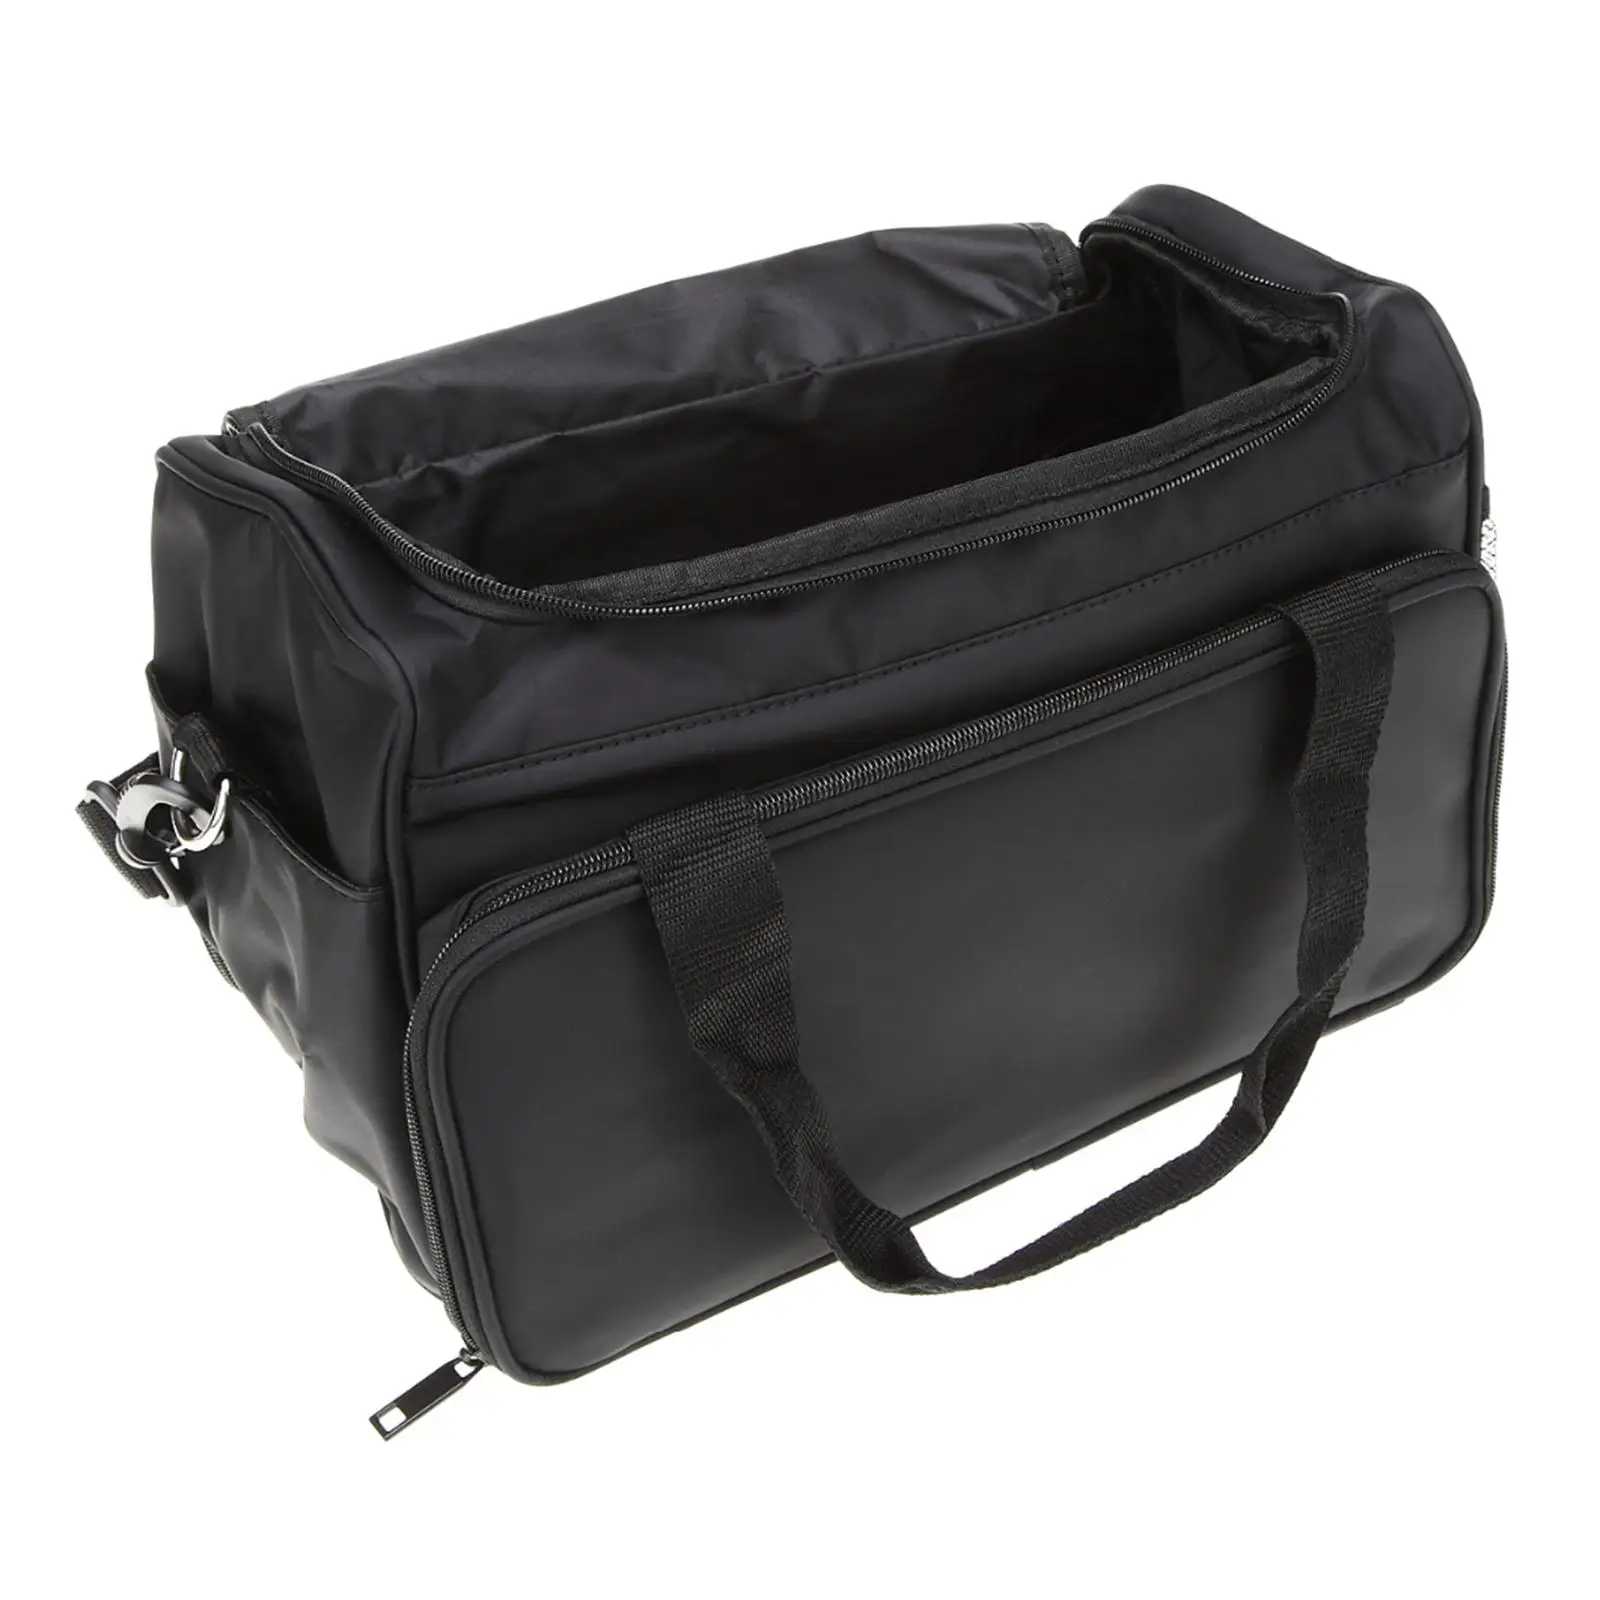 Salon Hair Styling Tool Storage Bag for Toiletries Hairstylist Tools Devices